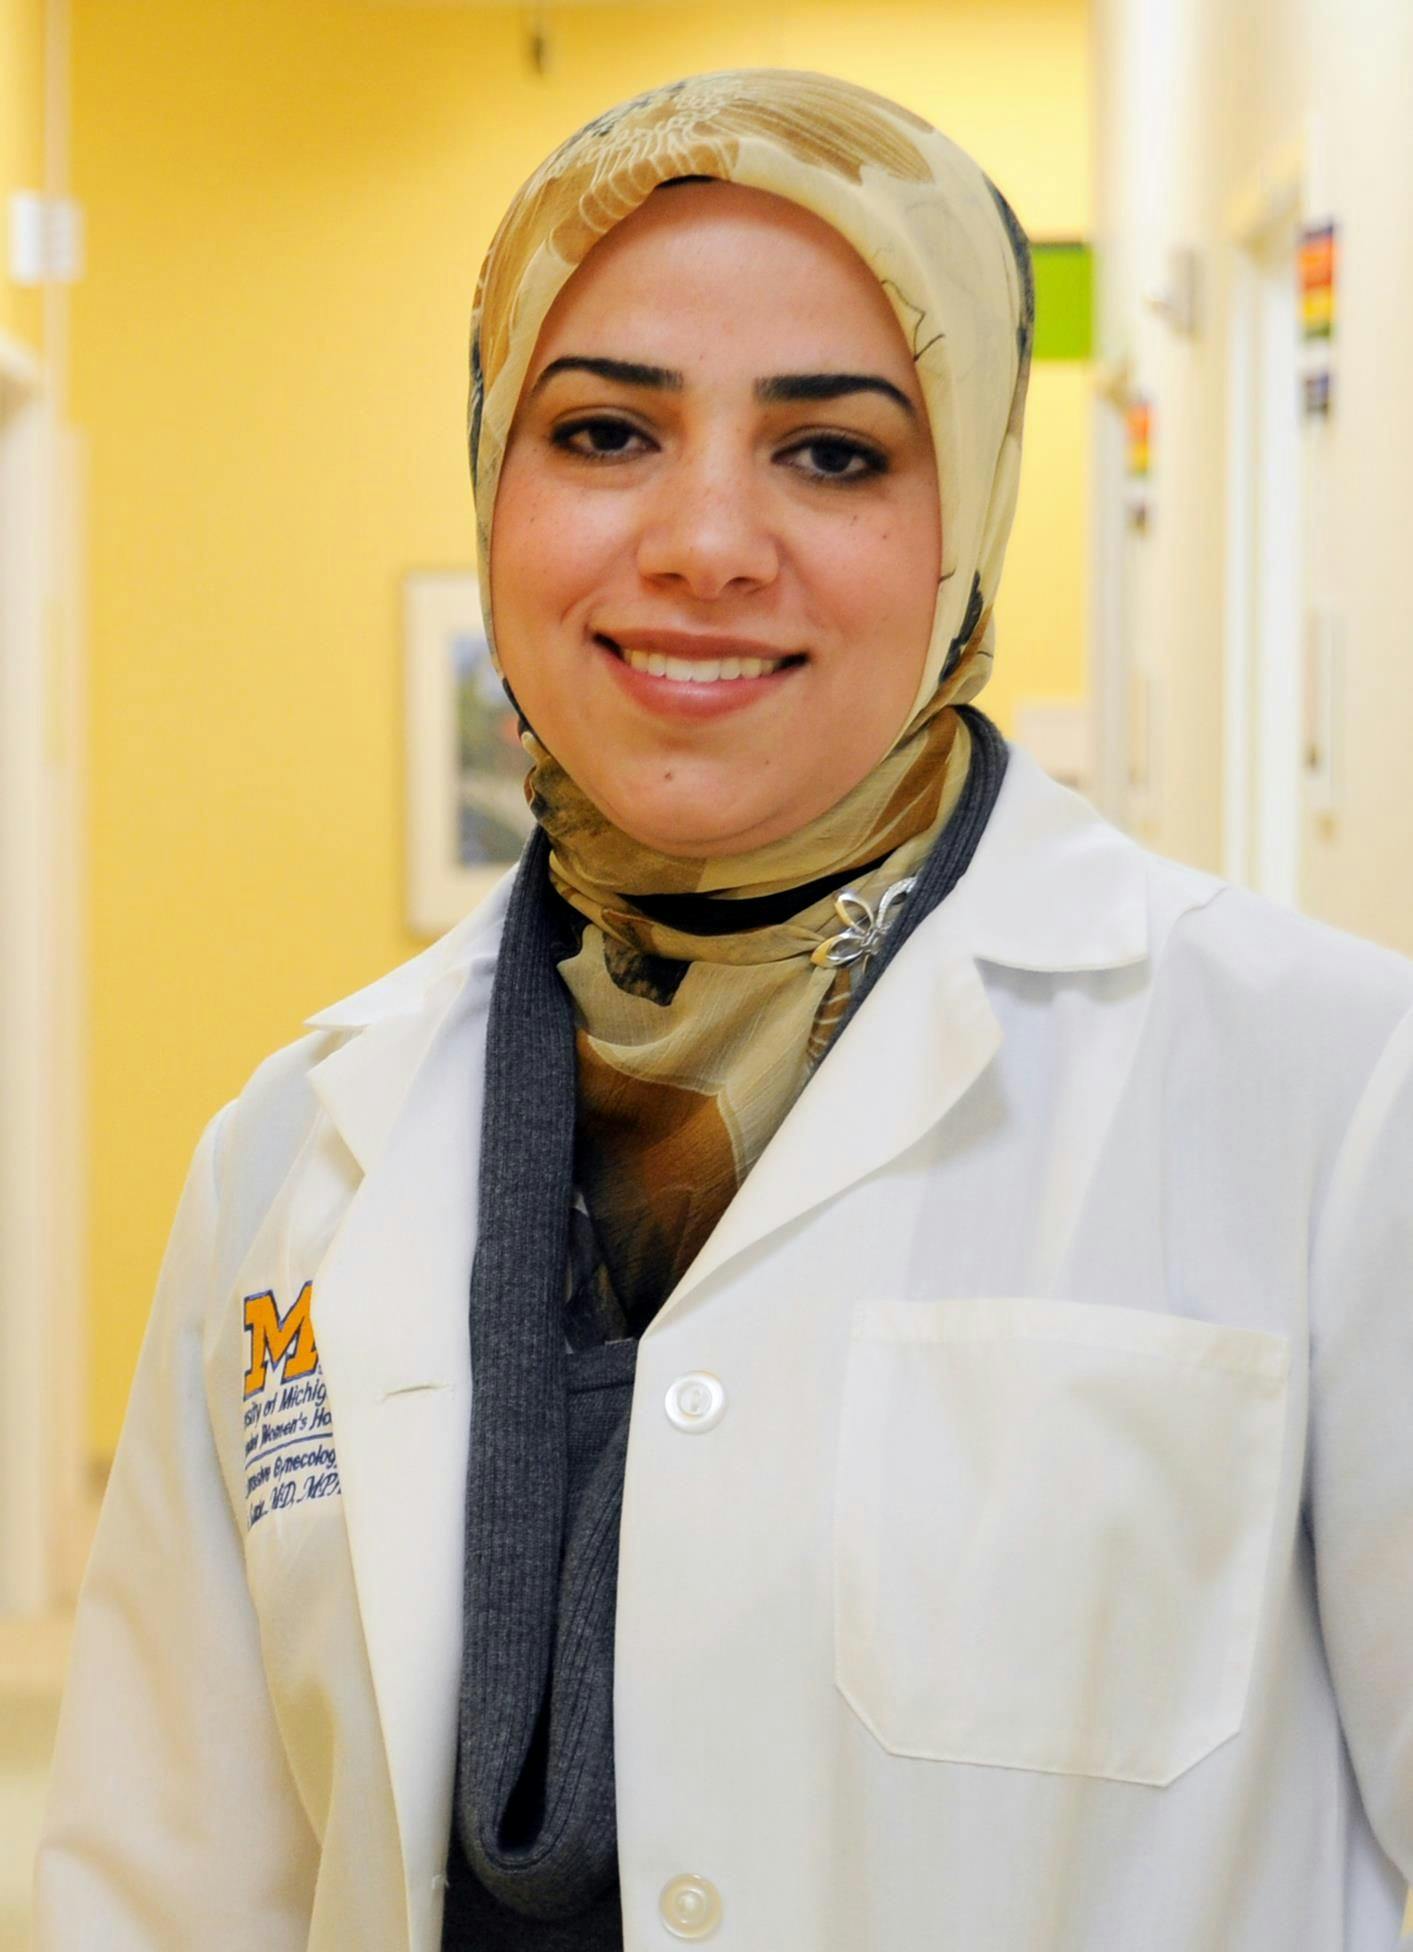 Principal investigator Sawsan As-Sanie, MD, MPH, co-chief of gynecology and director of minimally invasive gynecologic surgery at the University of Michigan in Ann Arbor.